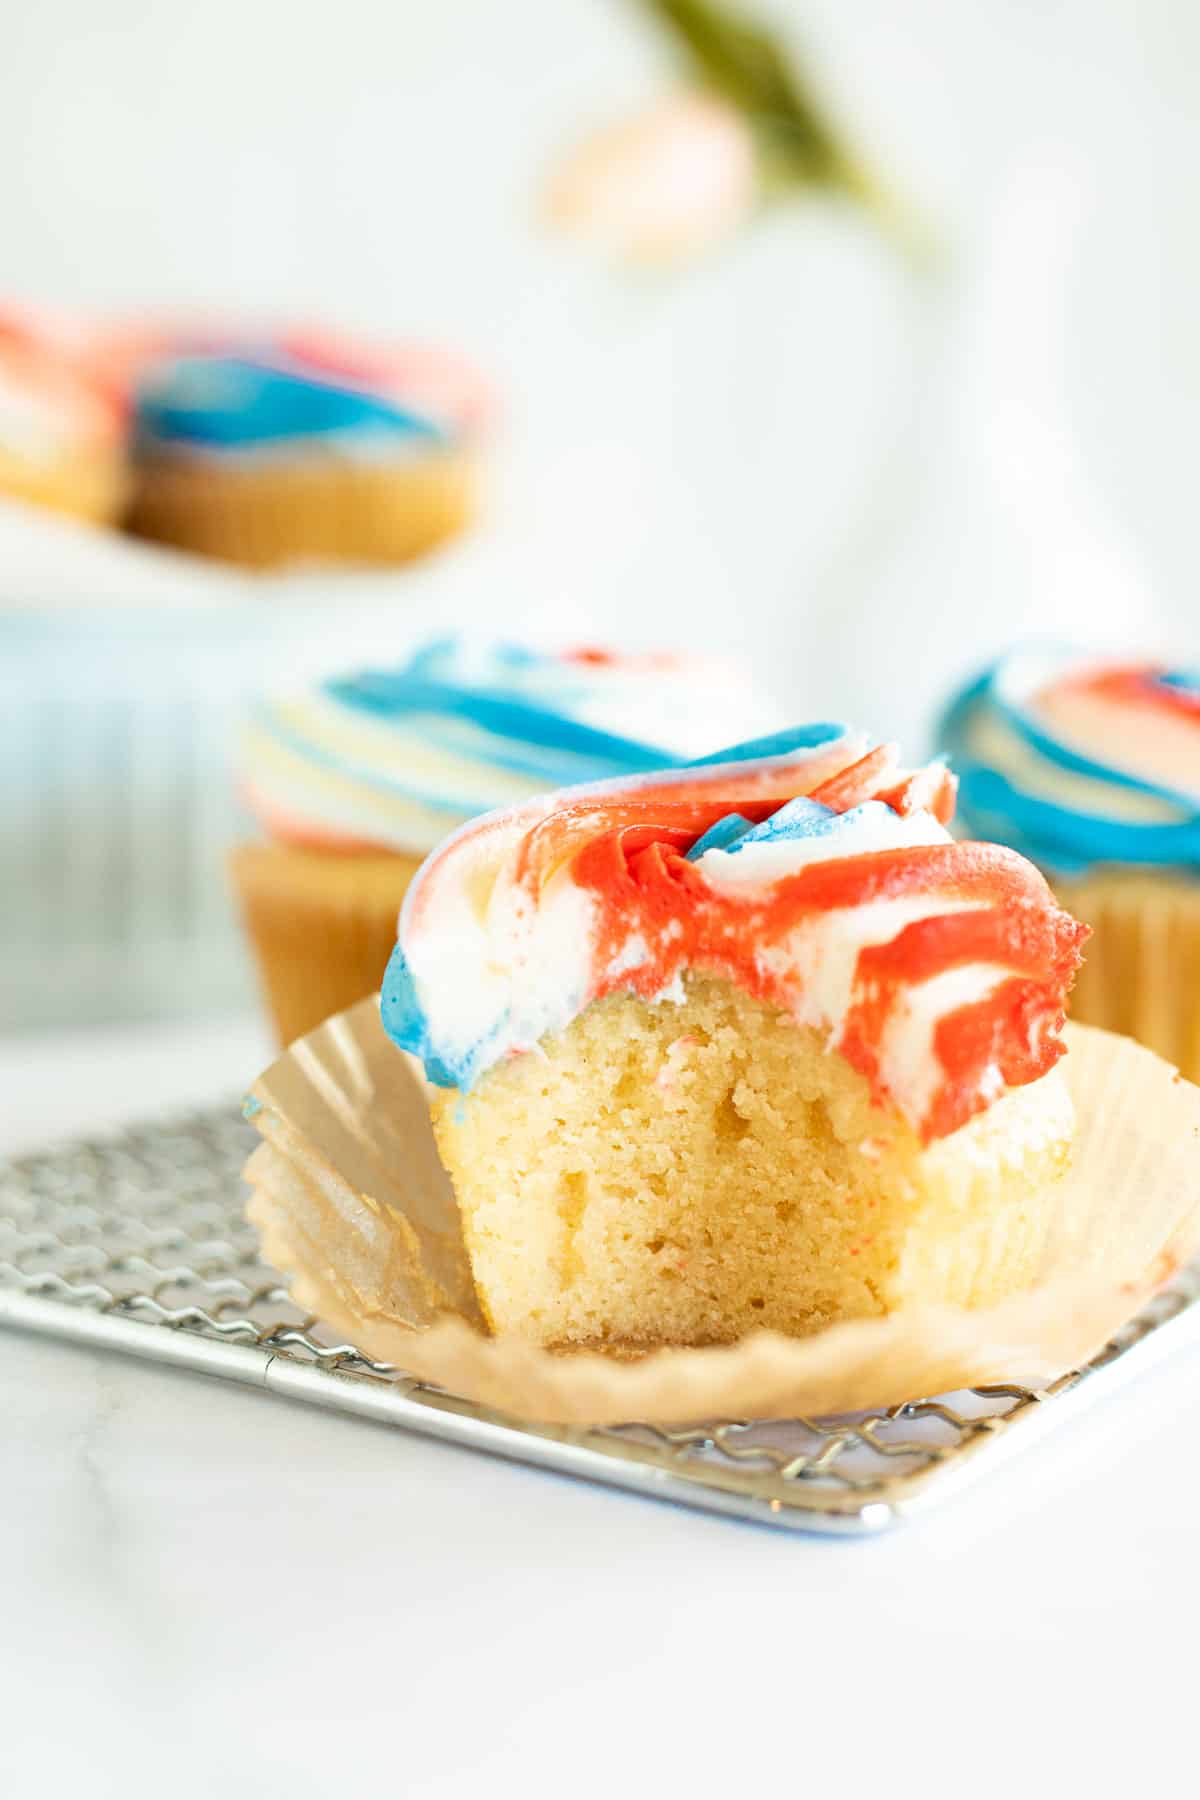 a bite taken out of a vanilla cupcakes with red, white, and blue frosting.